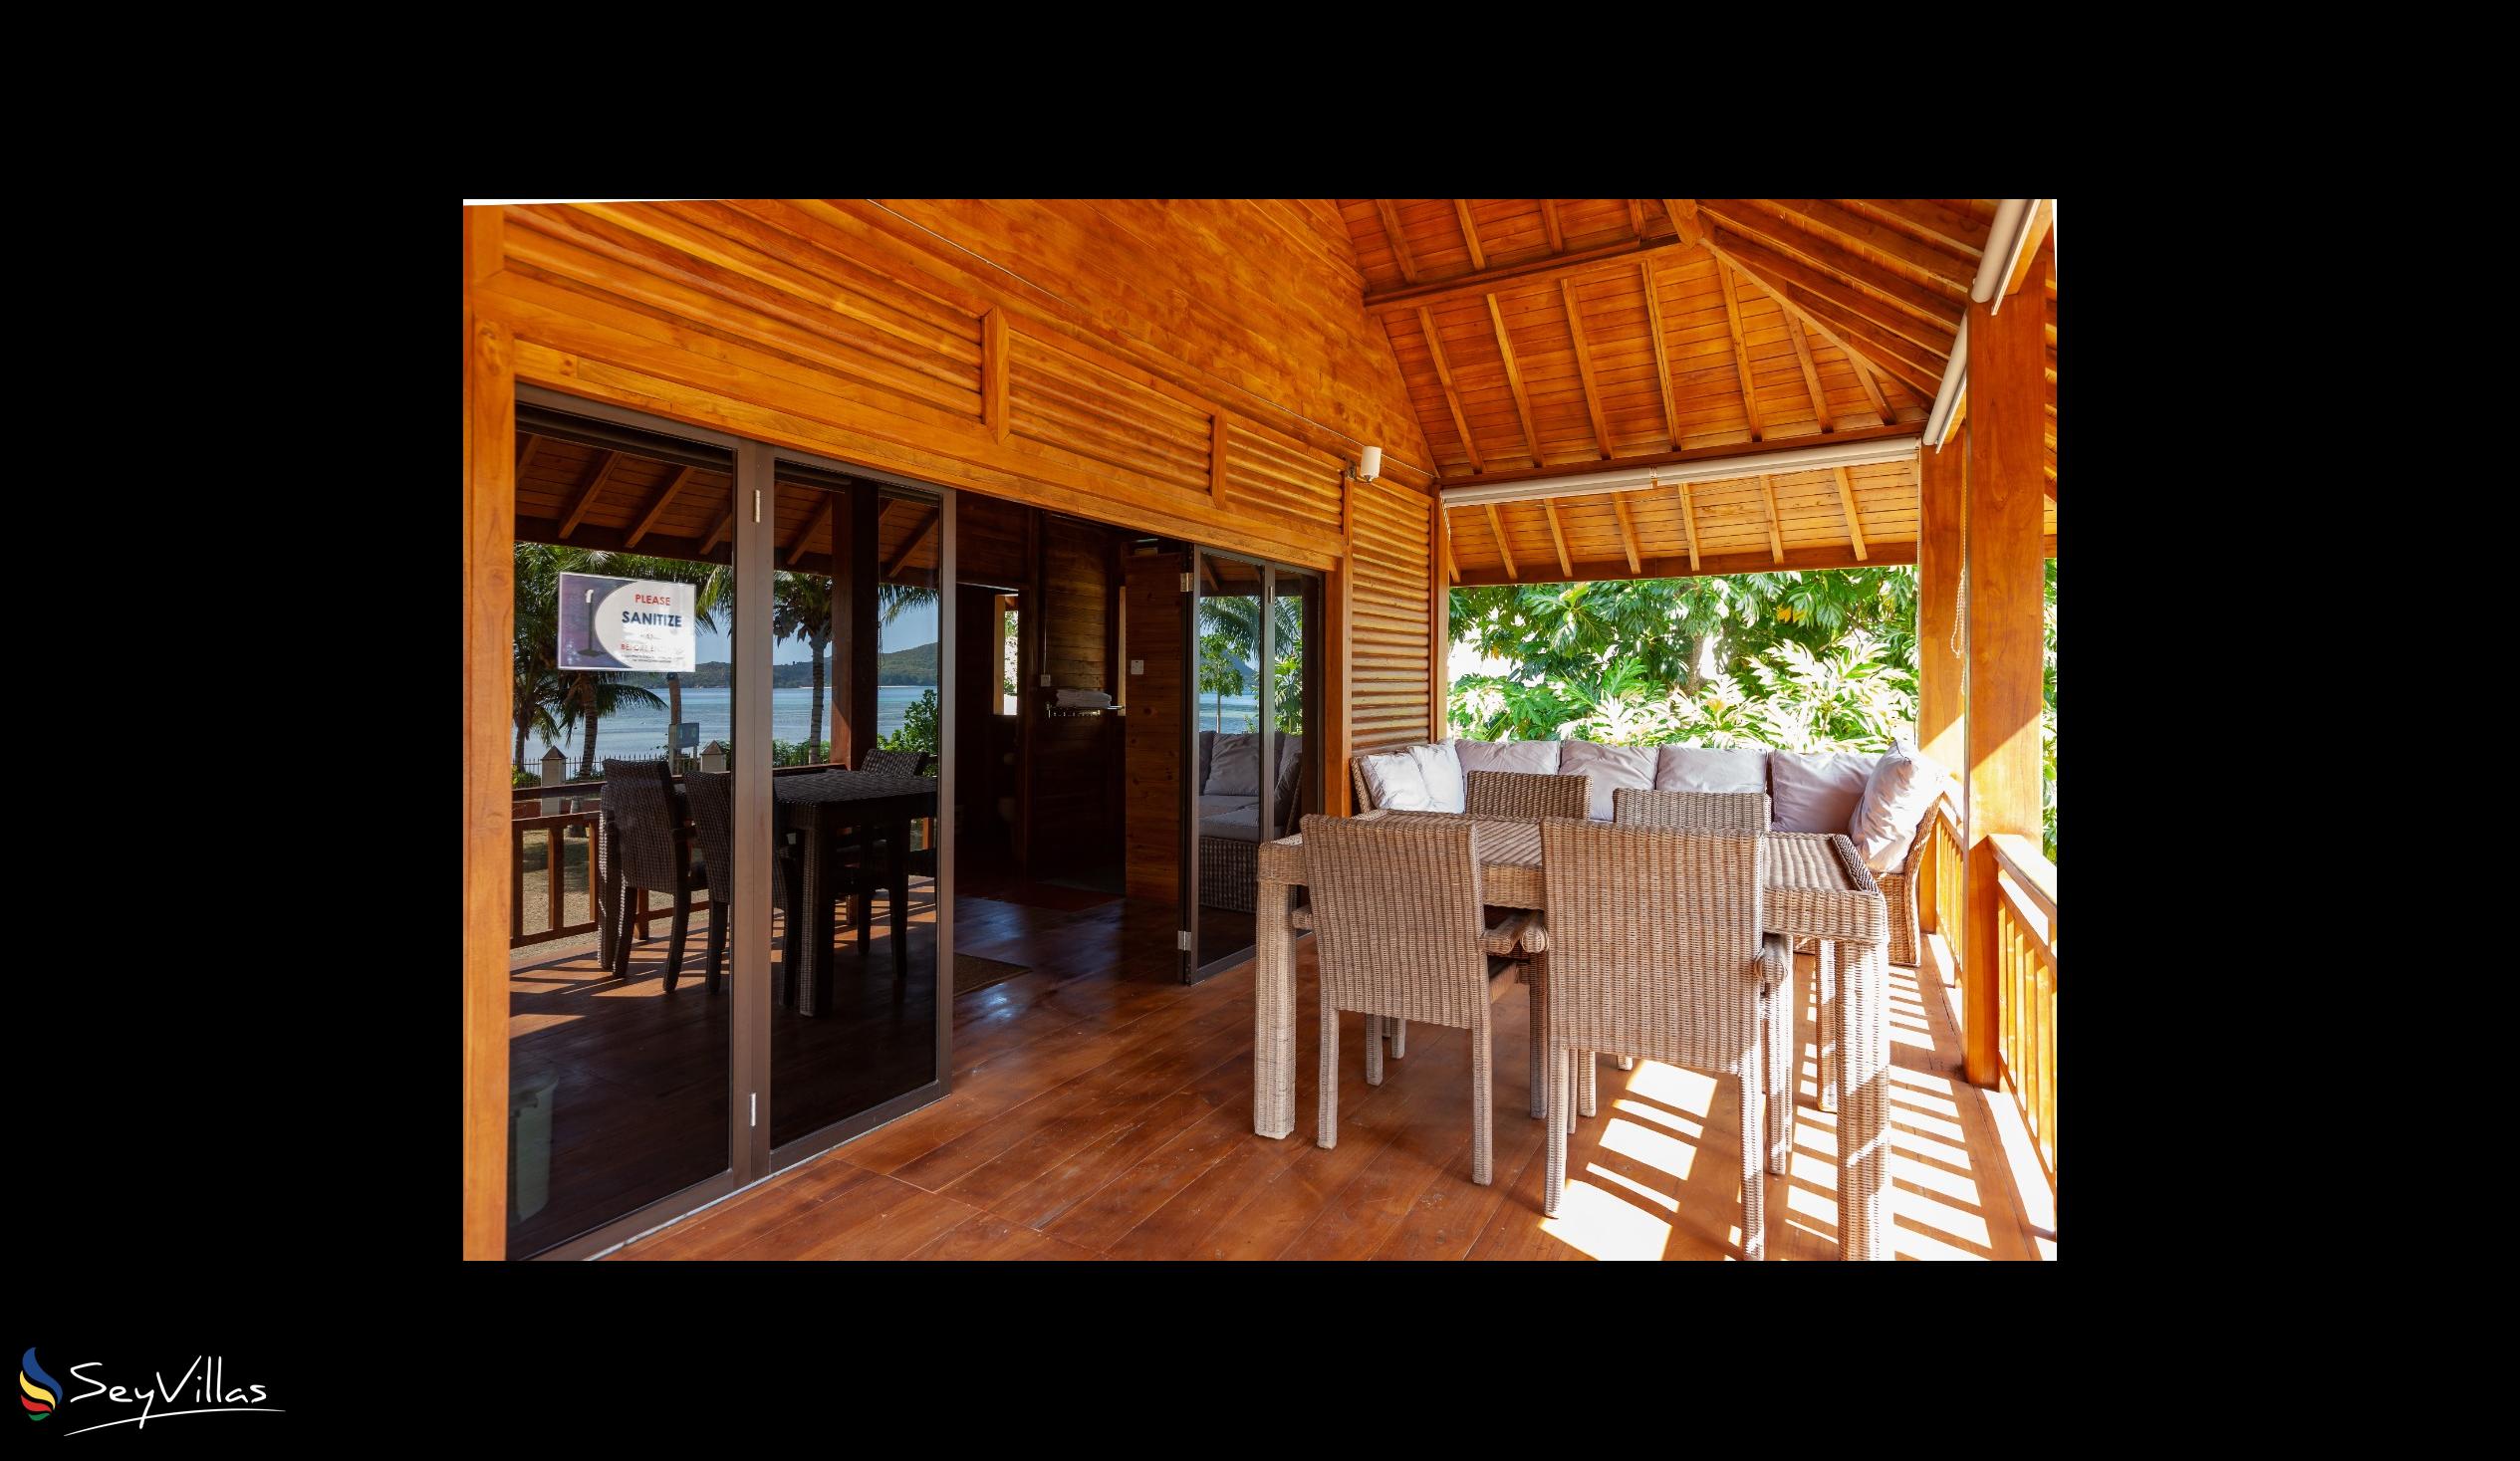 Photo 68: Hide Away - Wooden House with Sea View - Praslin (Seychelles)